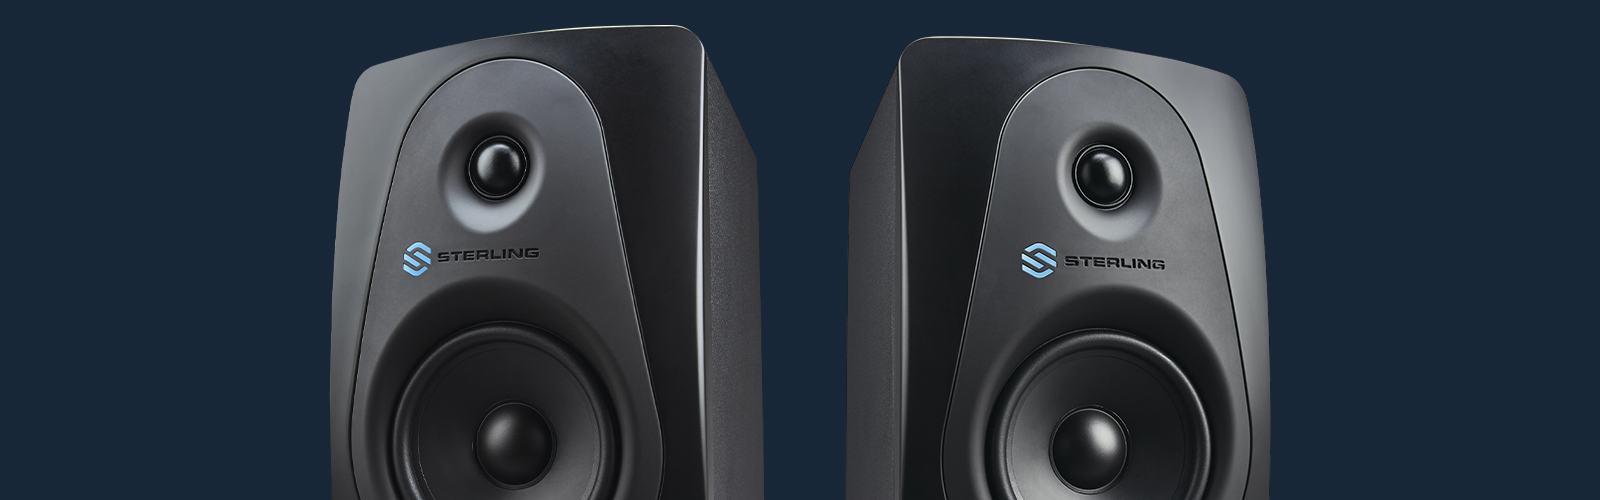 Sterling MX5 5-inch powered studio monitors pair on blue background.